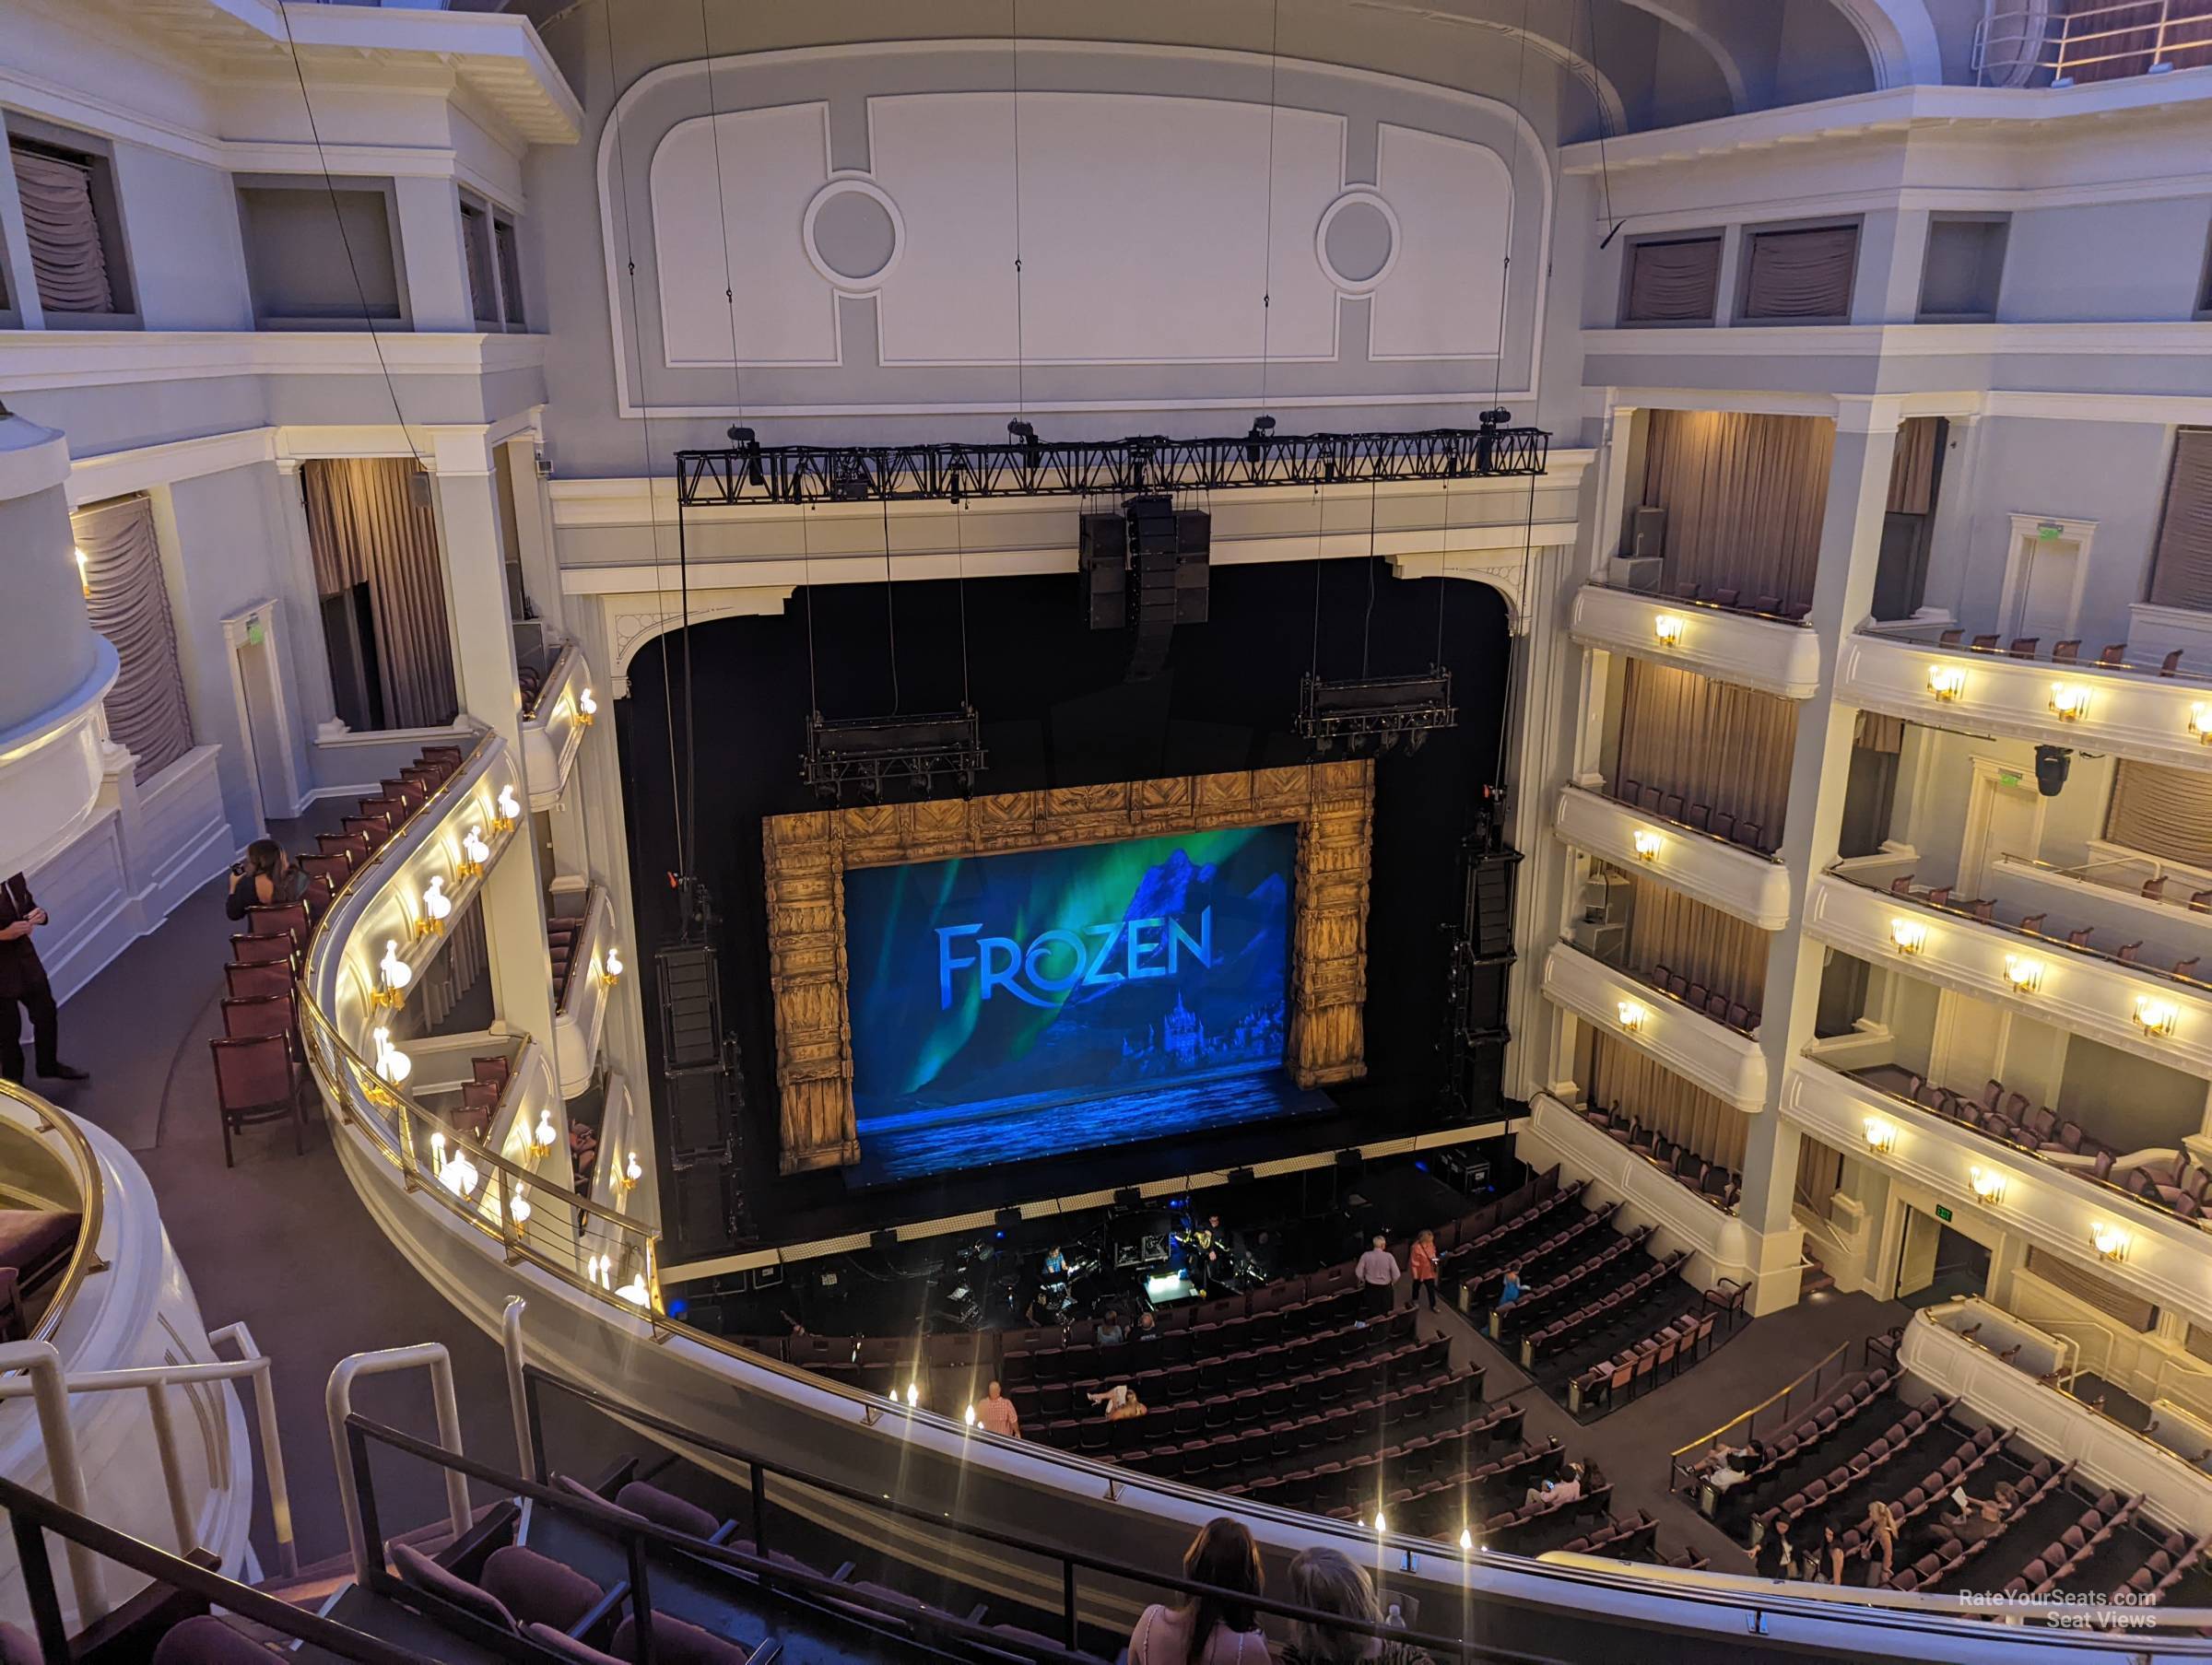 lower gallery, row i2 seat view  - bass performance hall